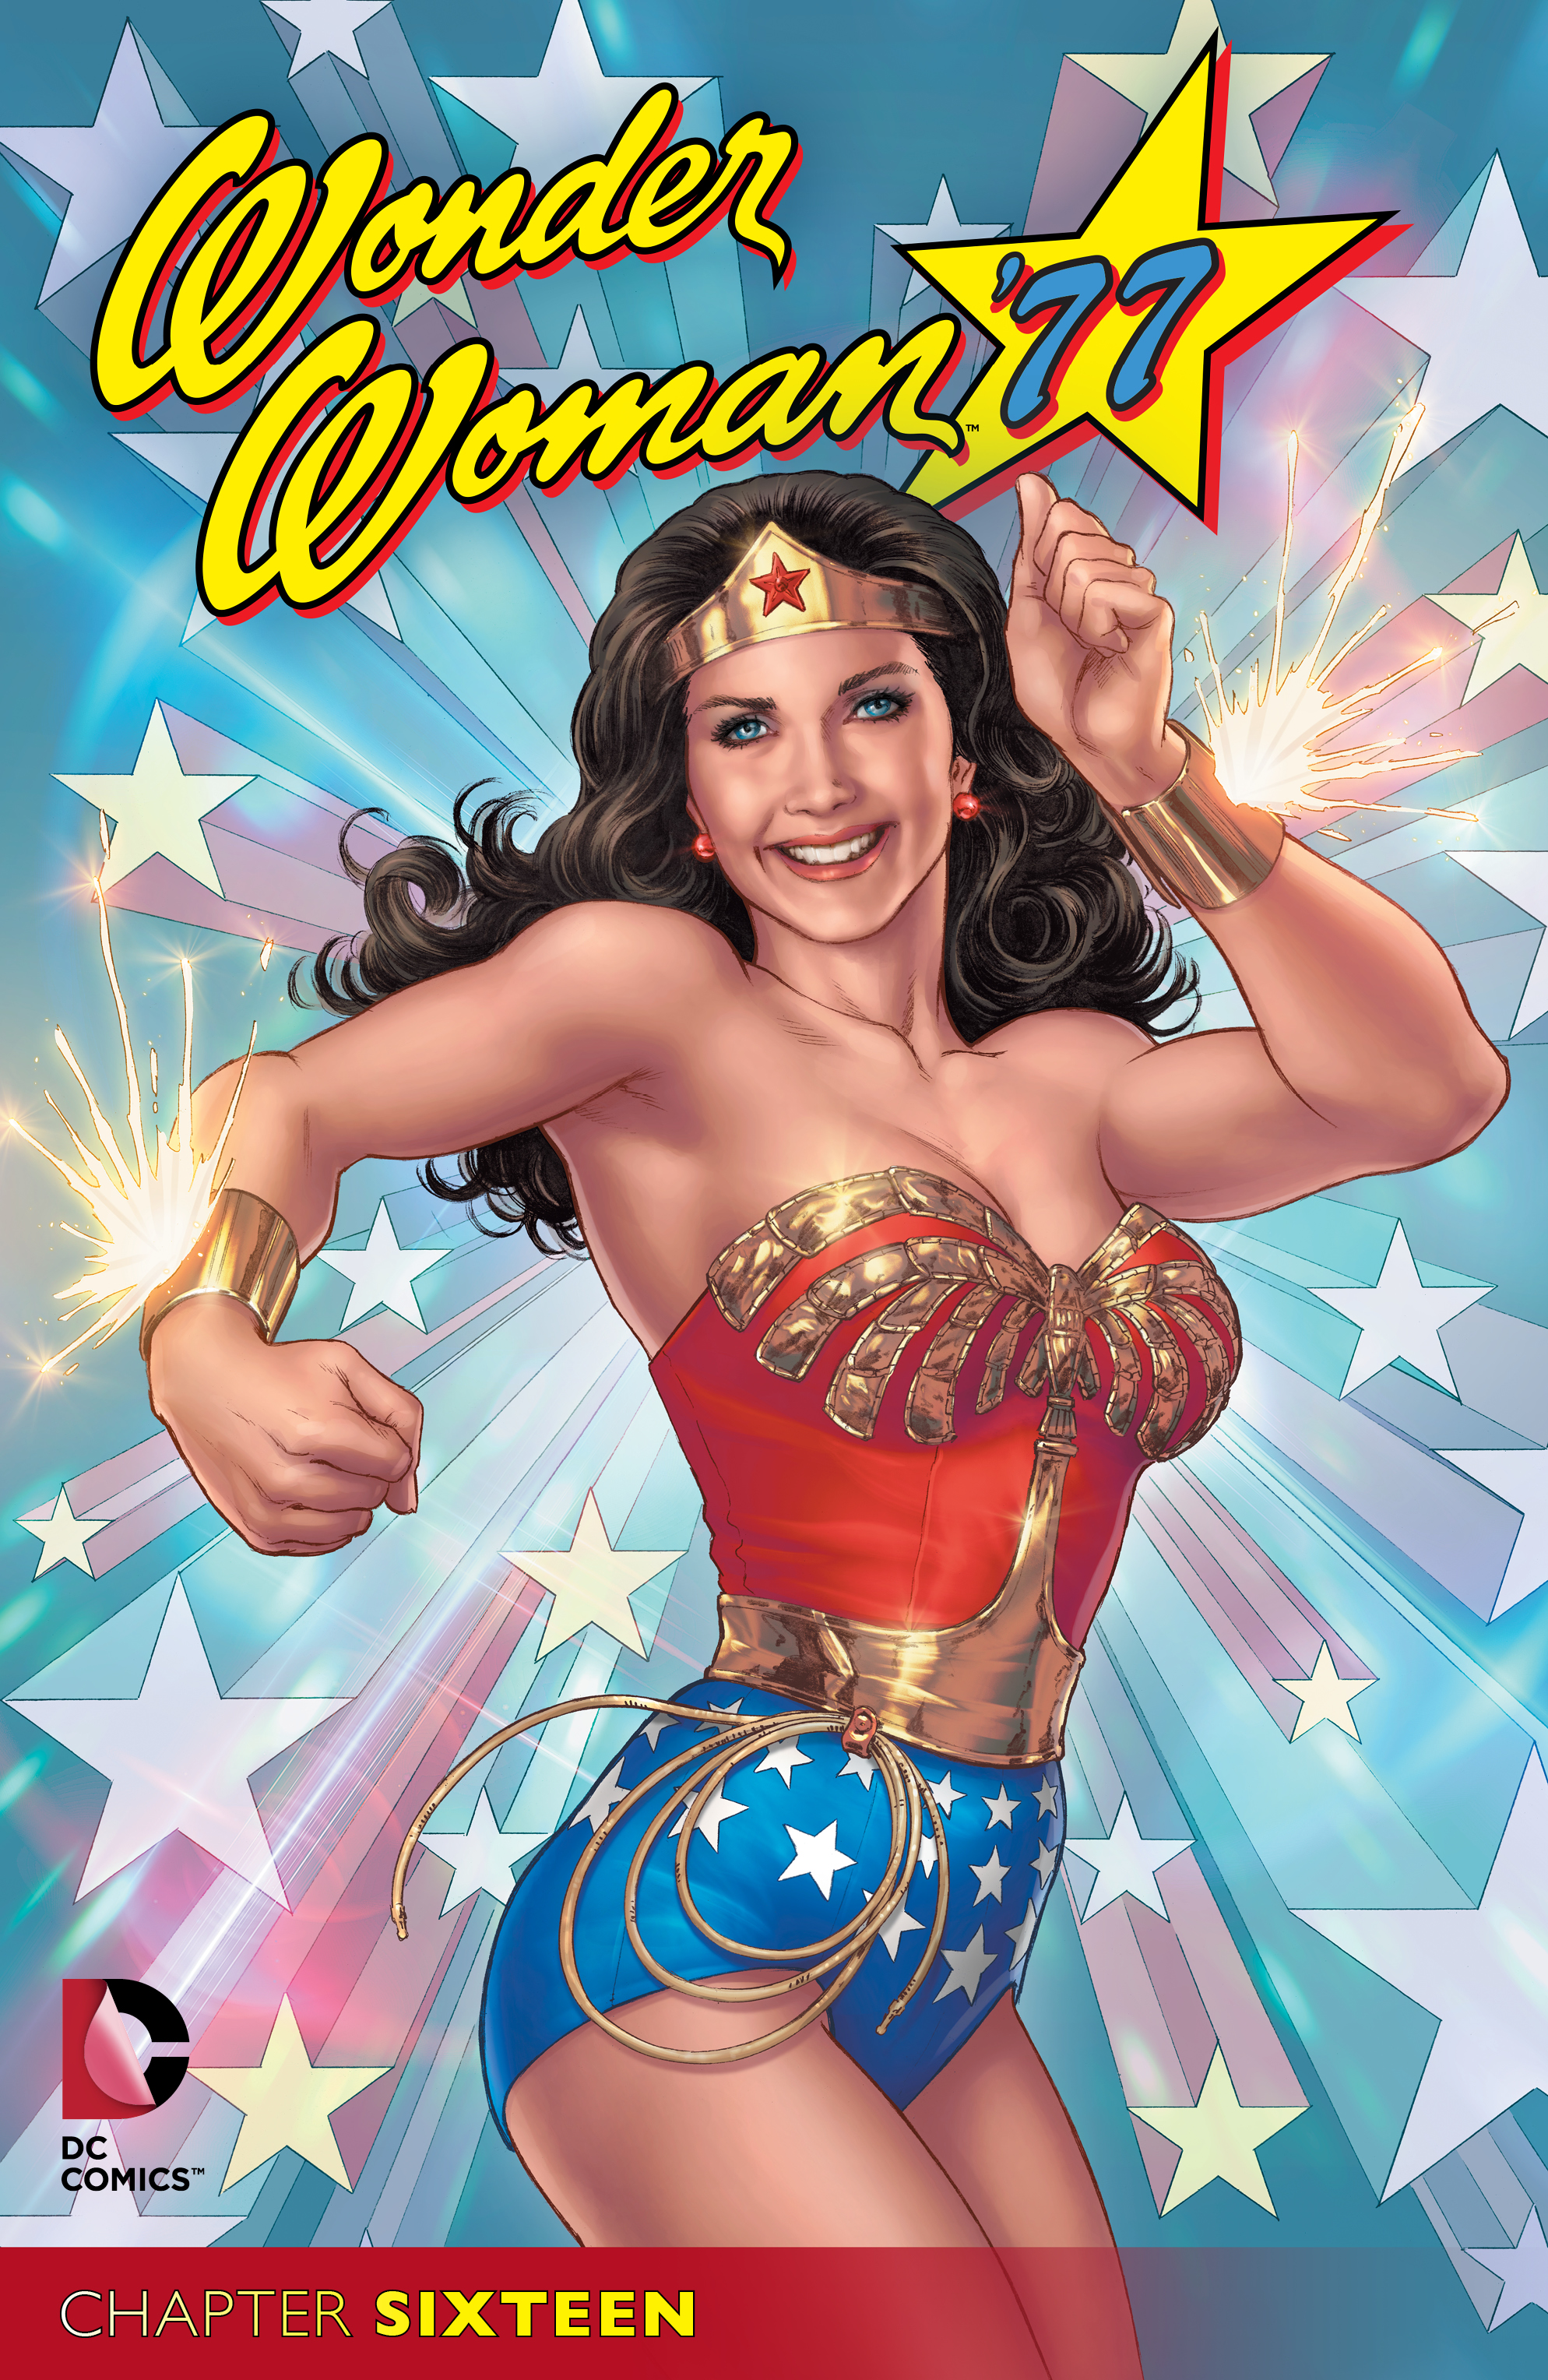 Wonder Woman '77 #16 preview images